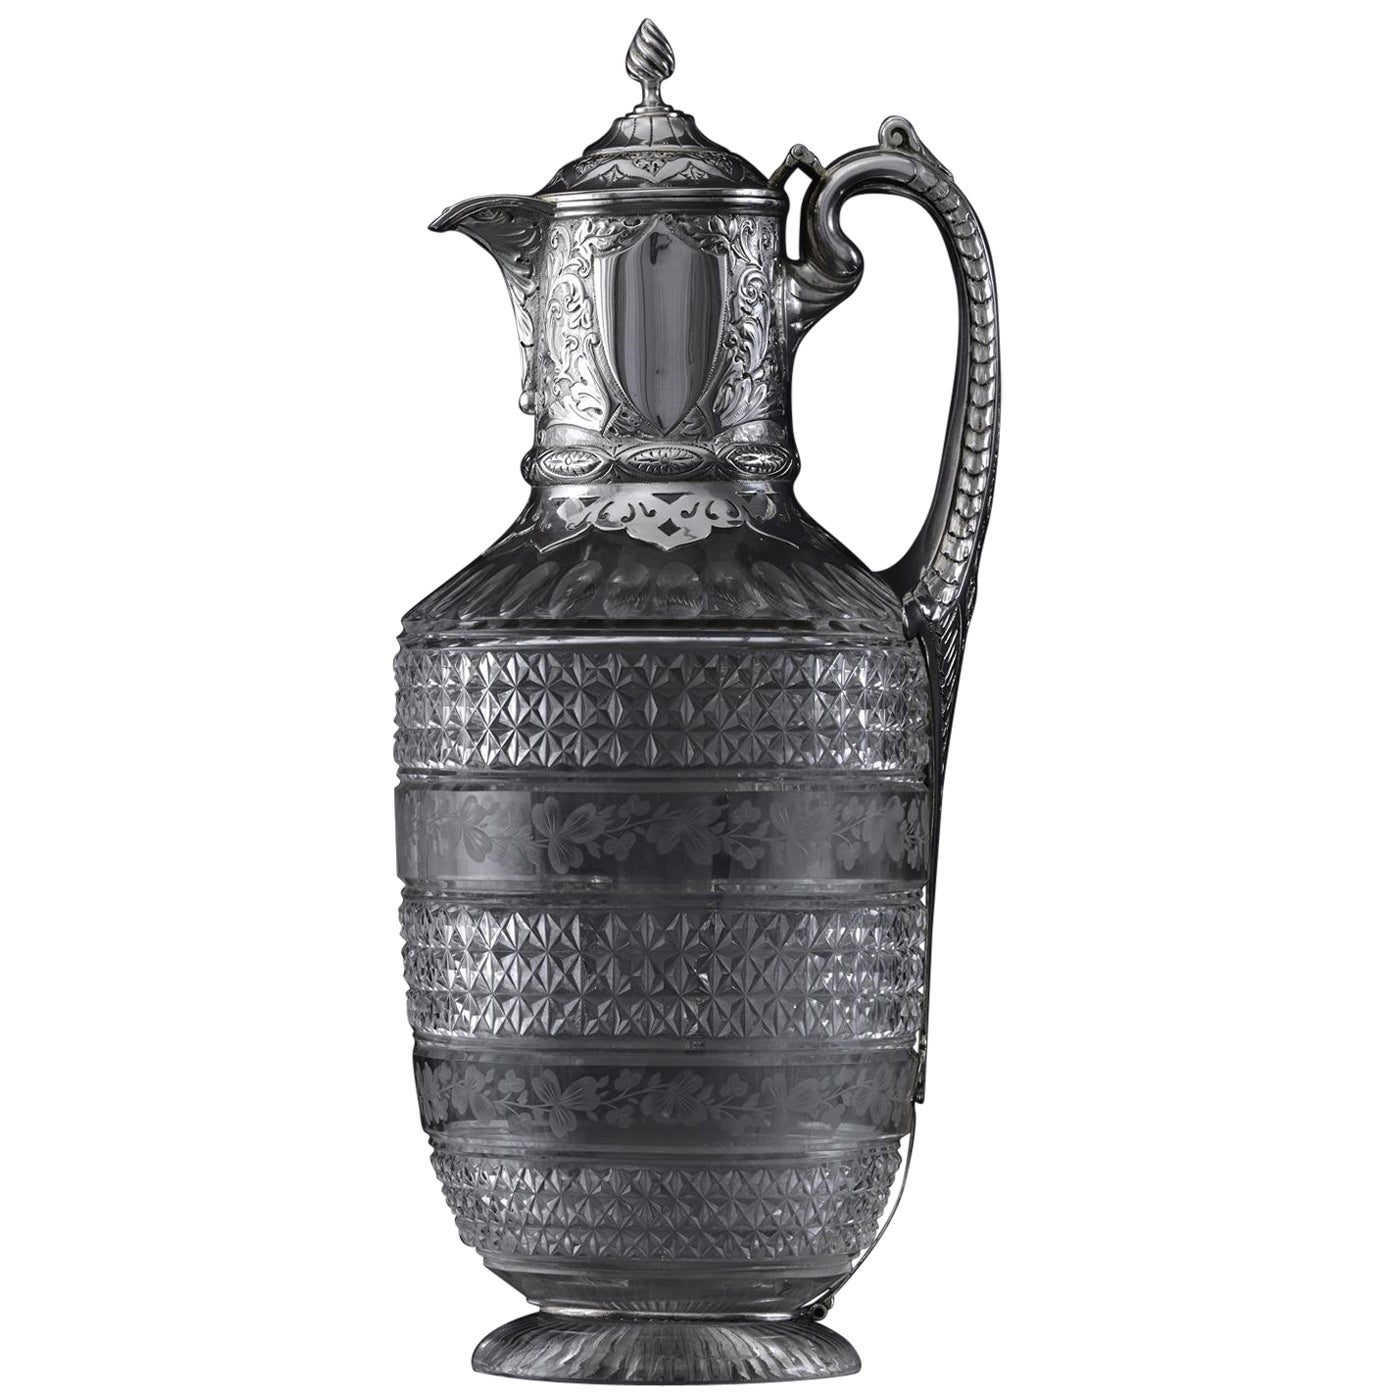 Silver-mounted antique cut glass wine jug